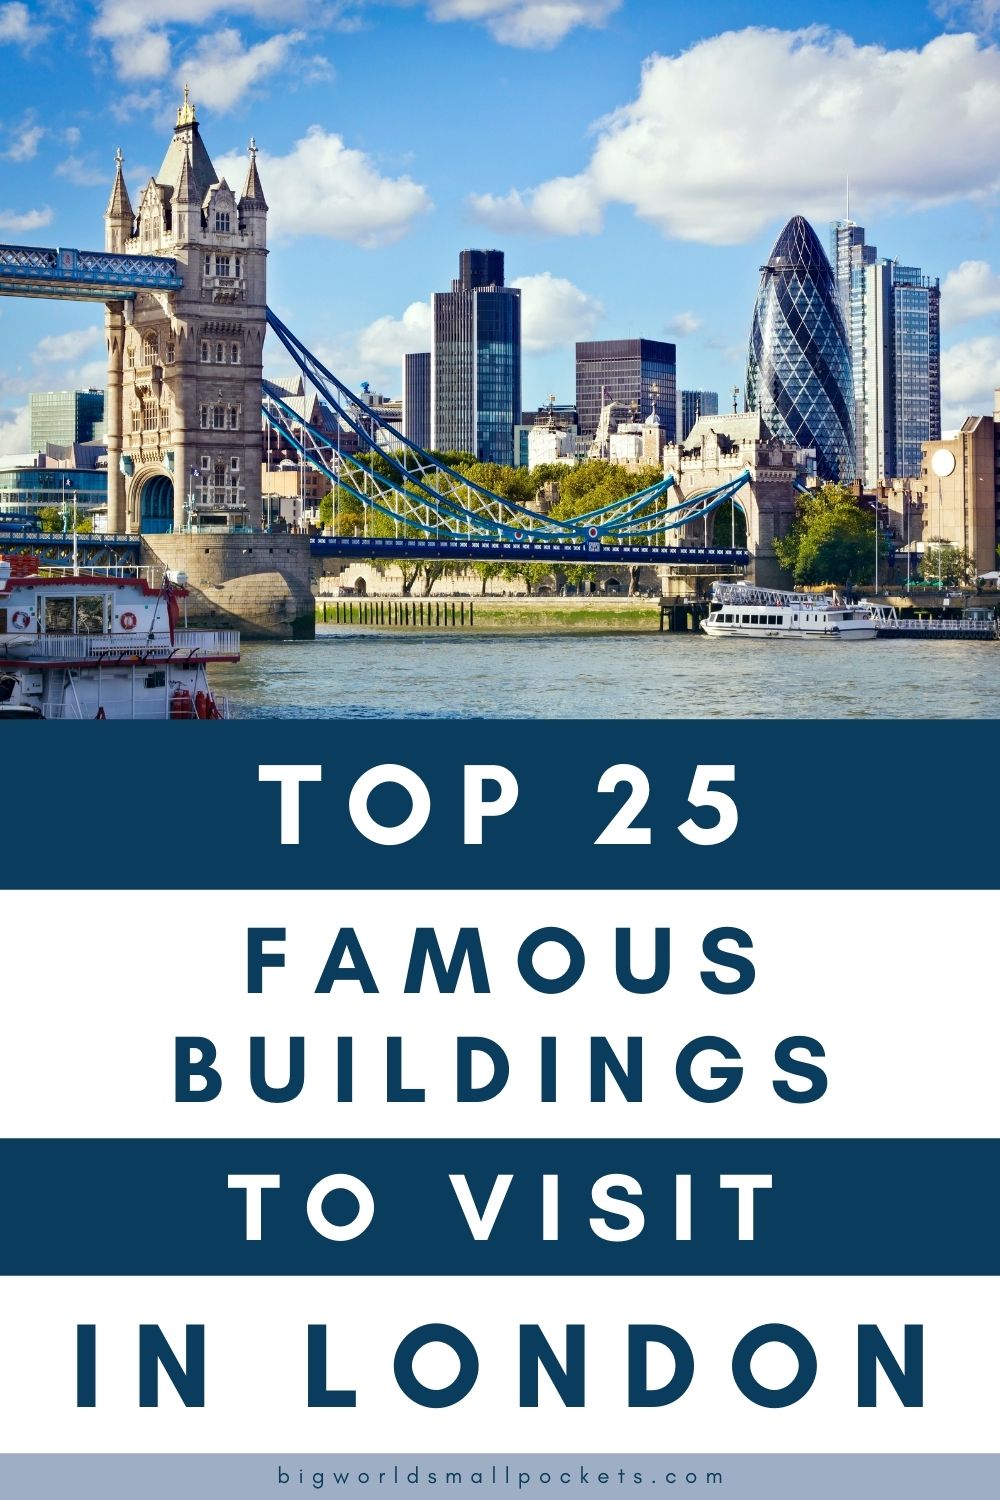 The 25 Most Famus Buildings to Visit in London